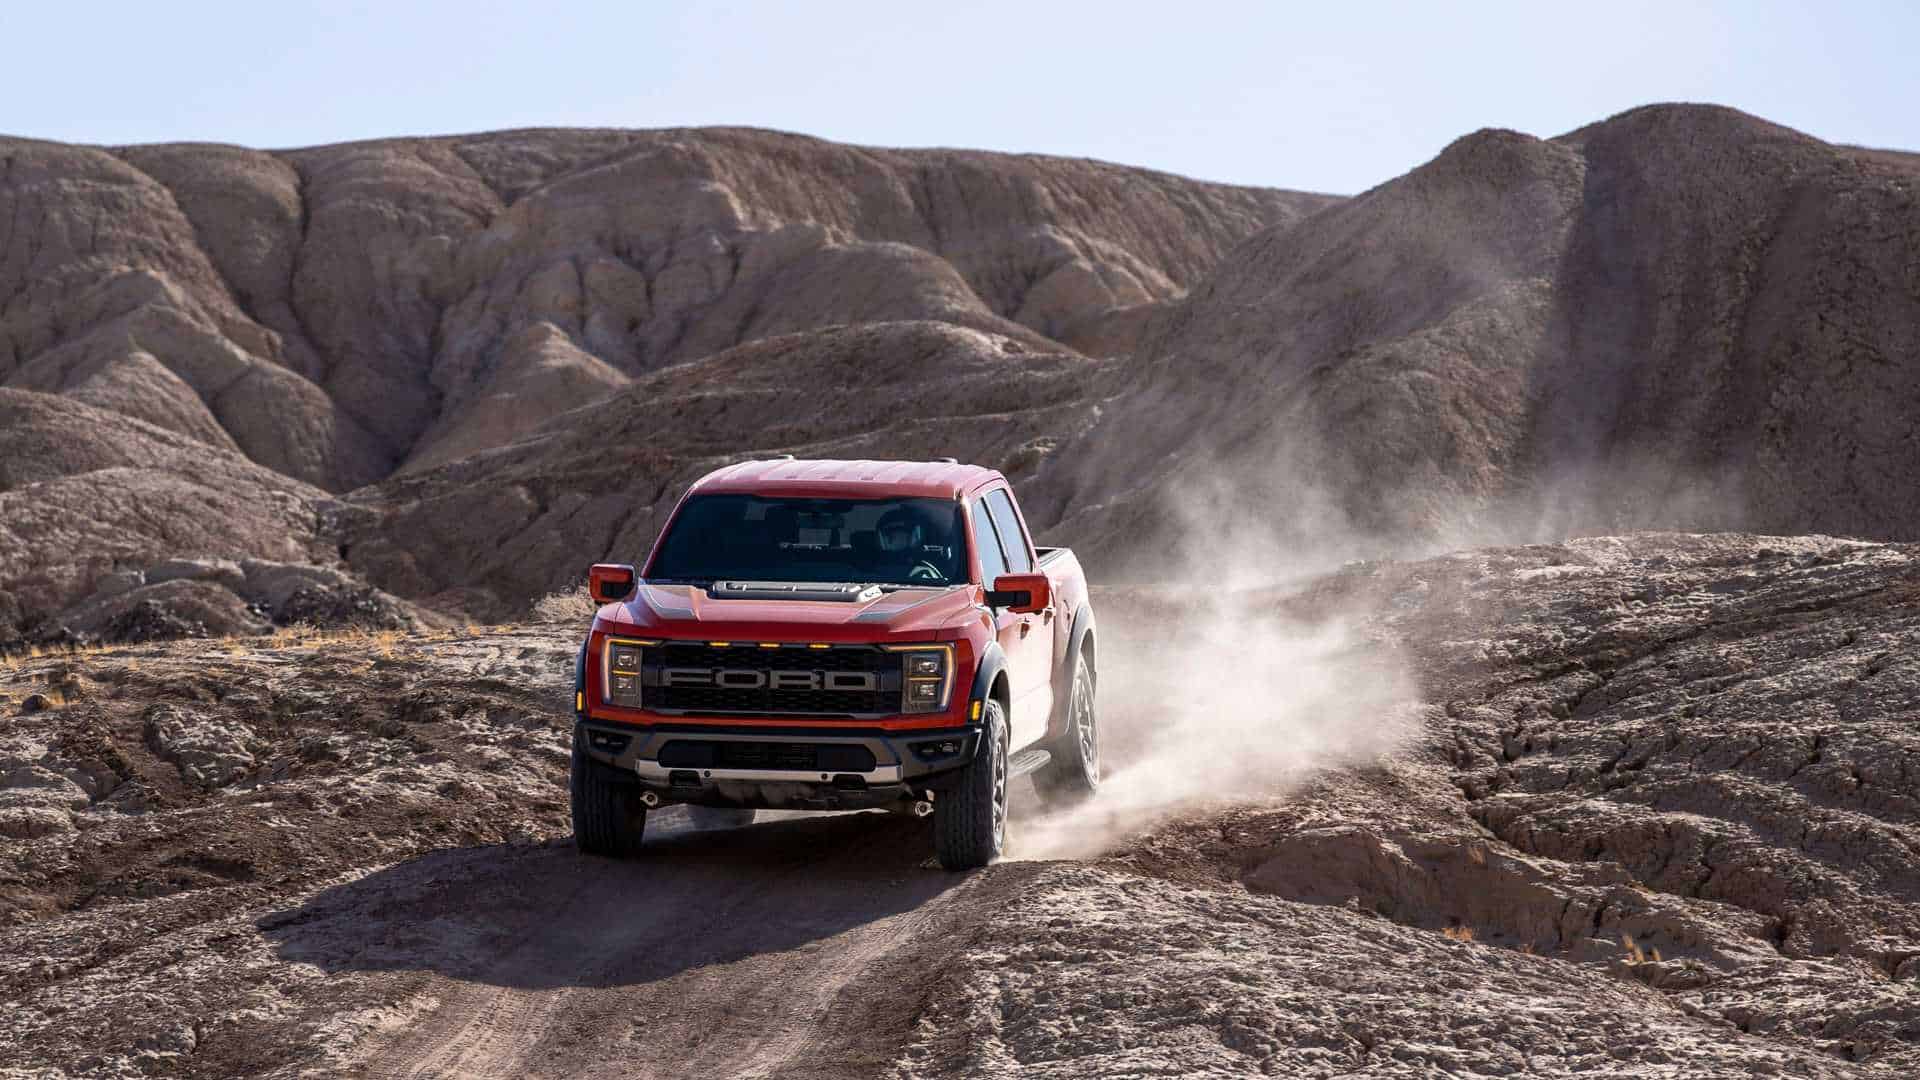 2022 Ford F-150 Red